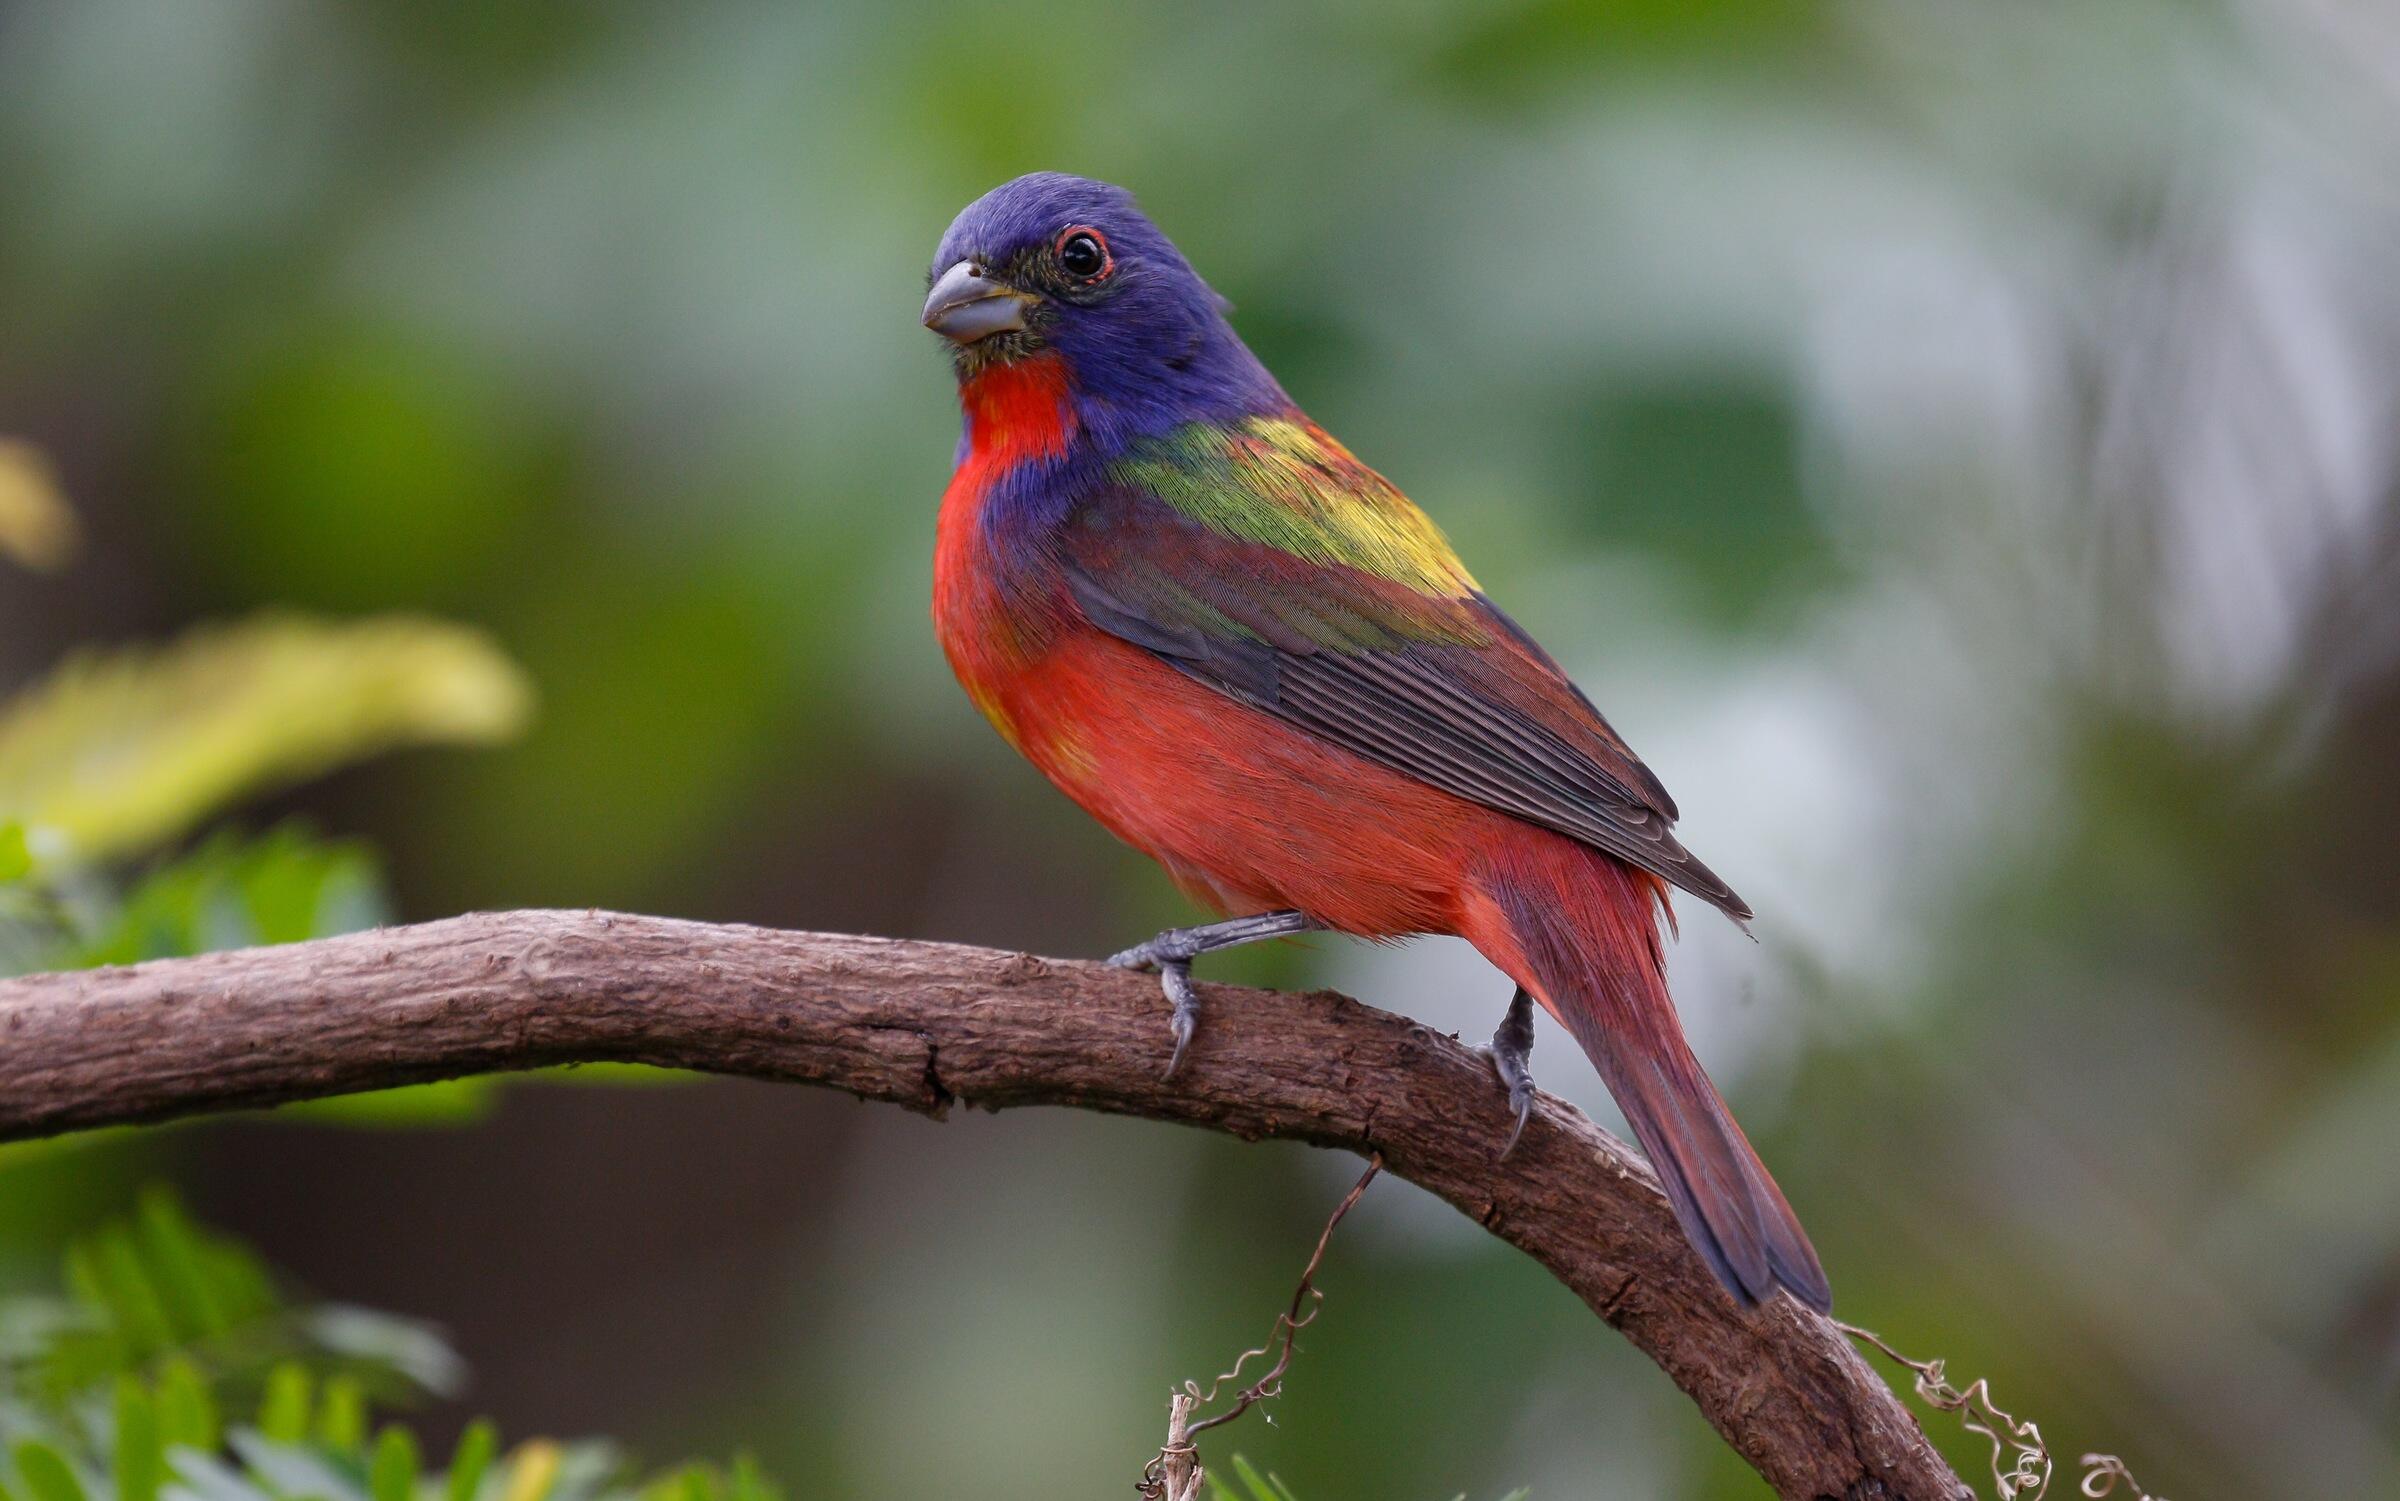 A Painted Bunting sits on a branch, turning its head back as if to regard you. Male Painting Buntings are known for their bright and varying colors, and having one in your yard is likely to make birds jealous.